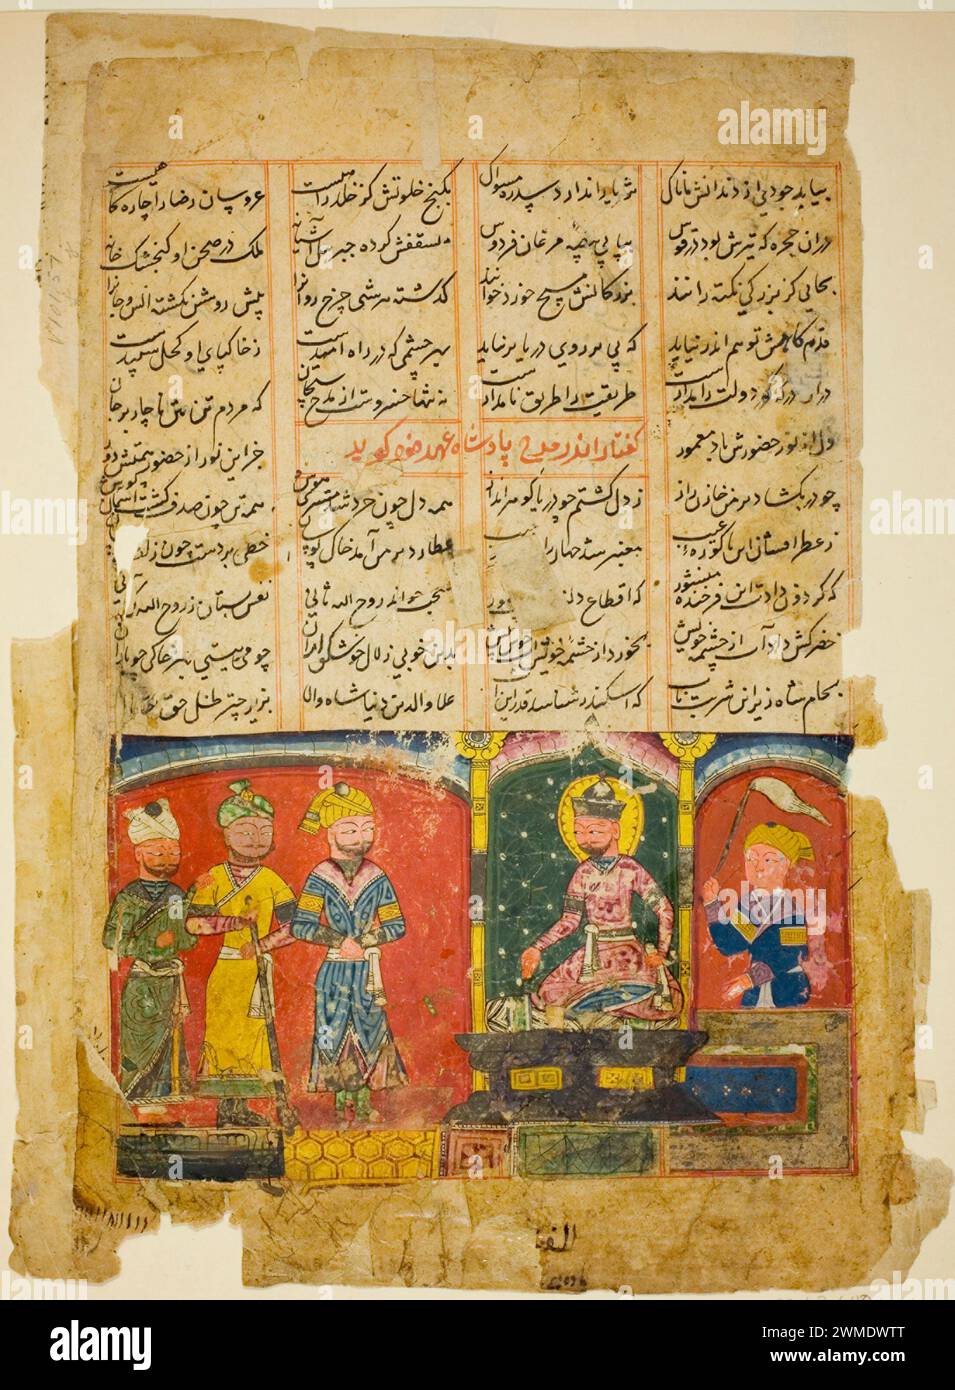 India, Amir Khusrau Dedicates His Poem to Sultan Ala al-Din Khalji, mid-15th century; a vibrant depiction of a court scene with a seated royal figure and attendants, reflecting the rich cultural and poetic heritage of the Delhi Sultanate period Stock Photo